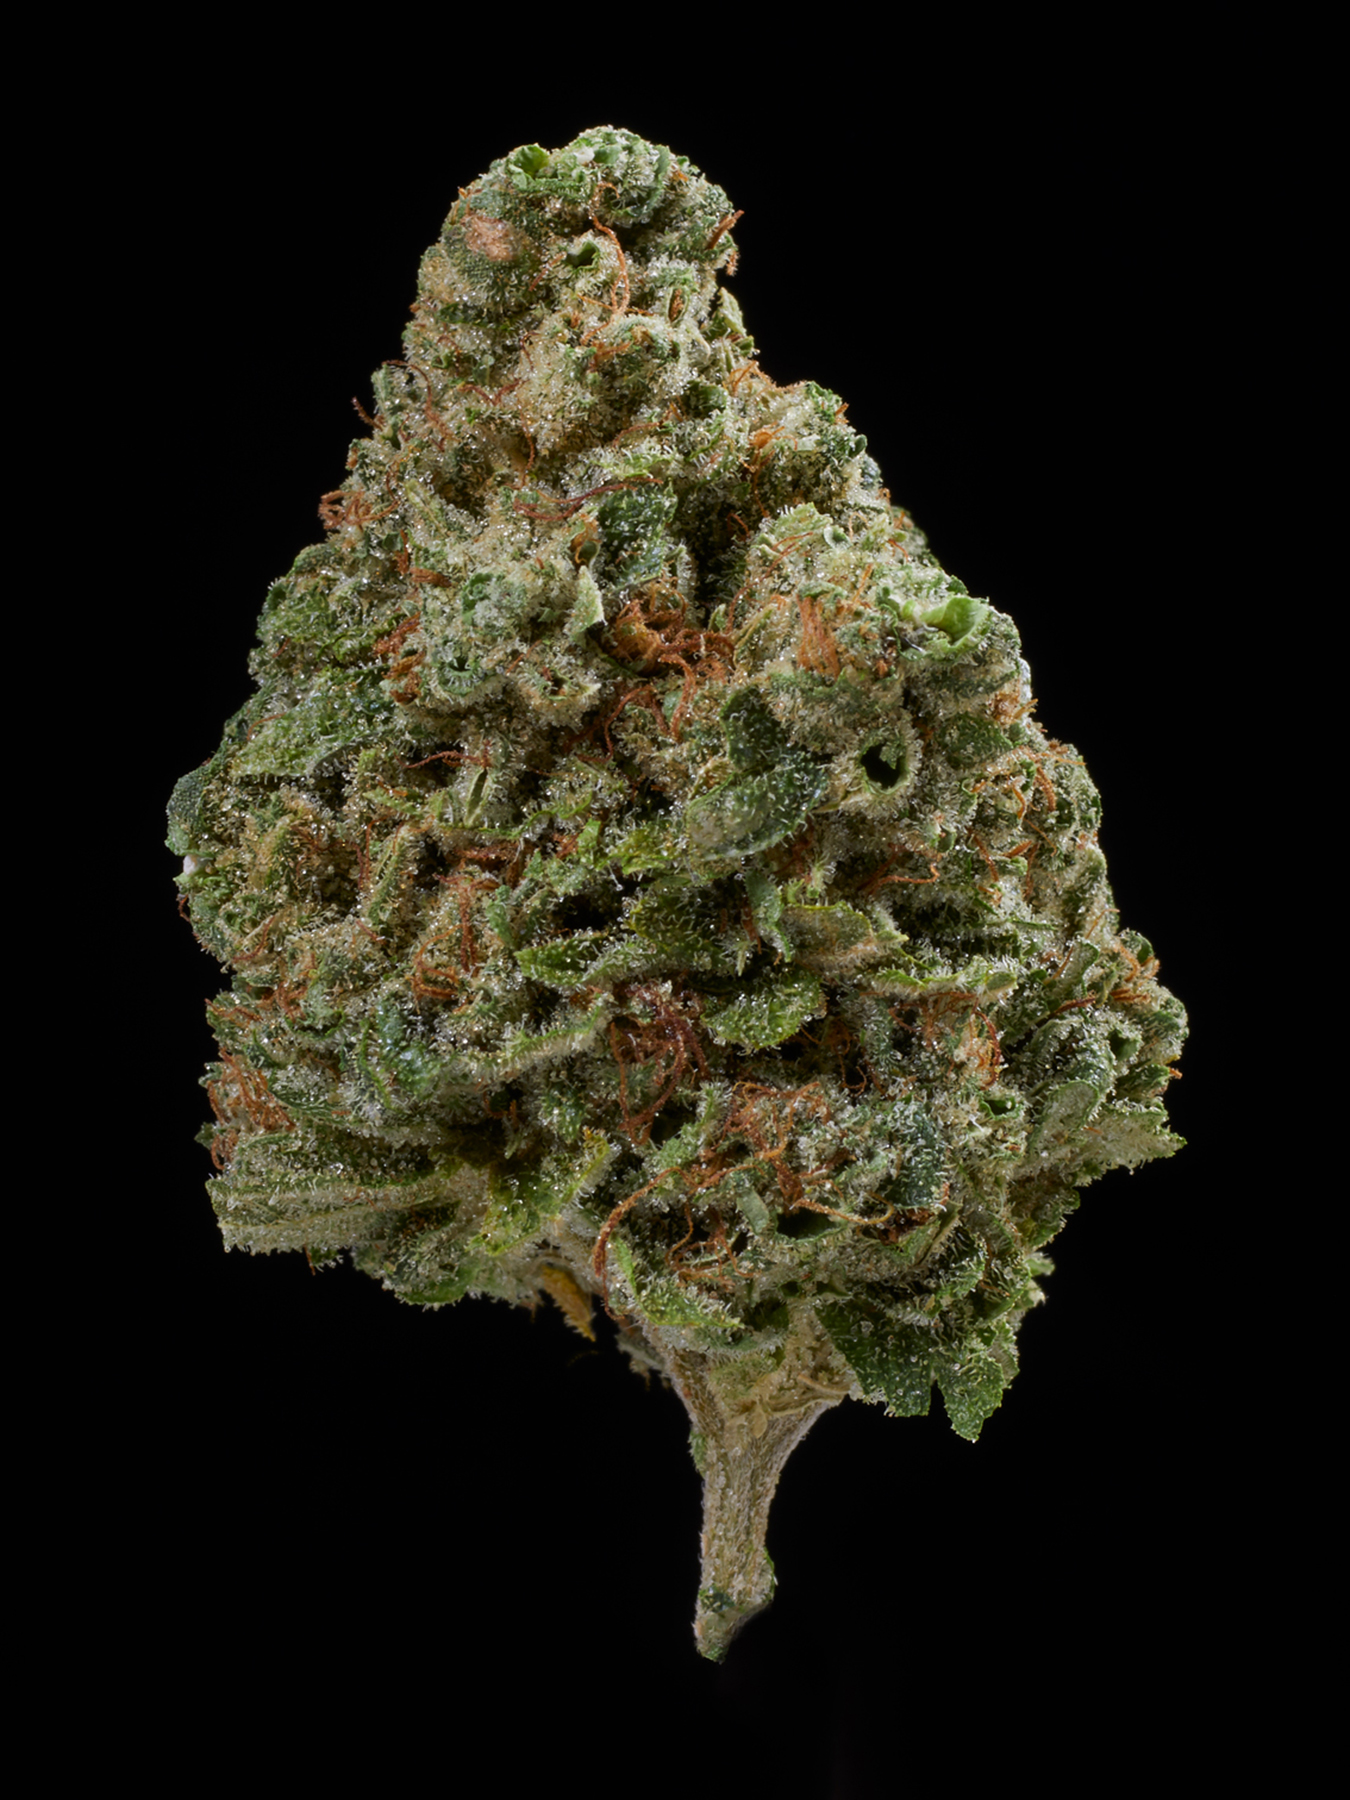 The Best Strains Of All Time 100 Popular Cannabis Strains To